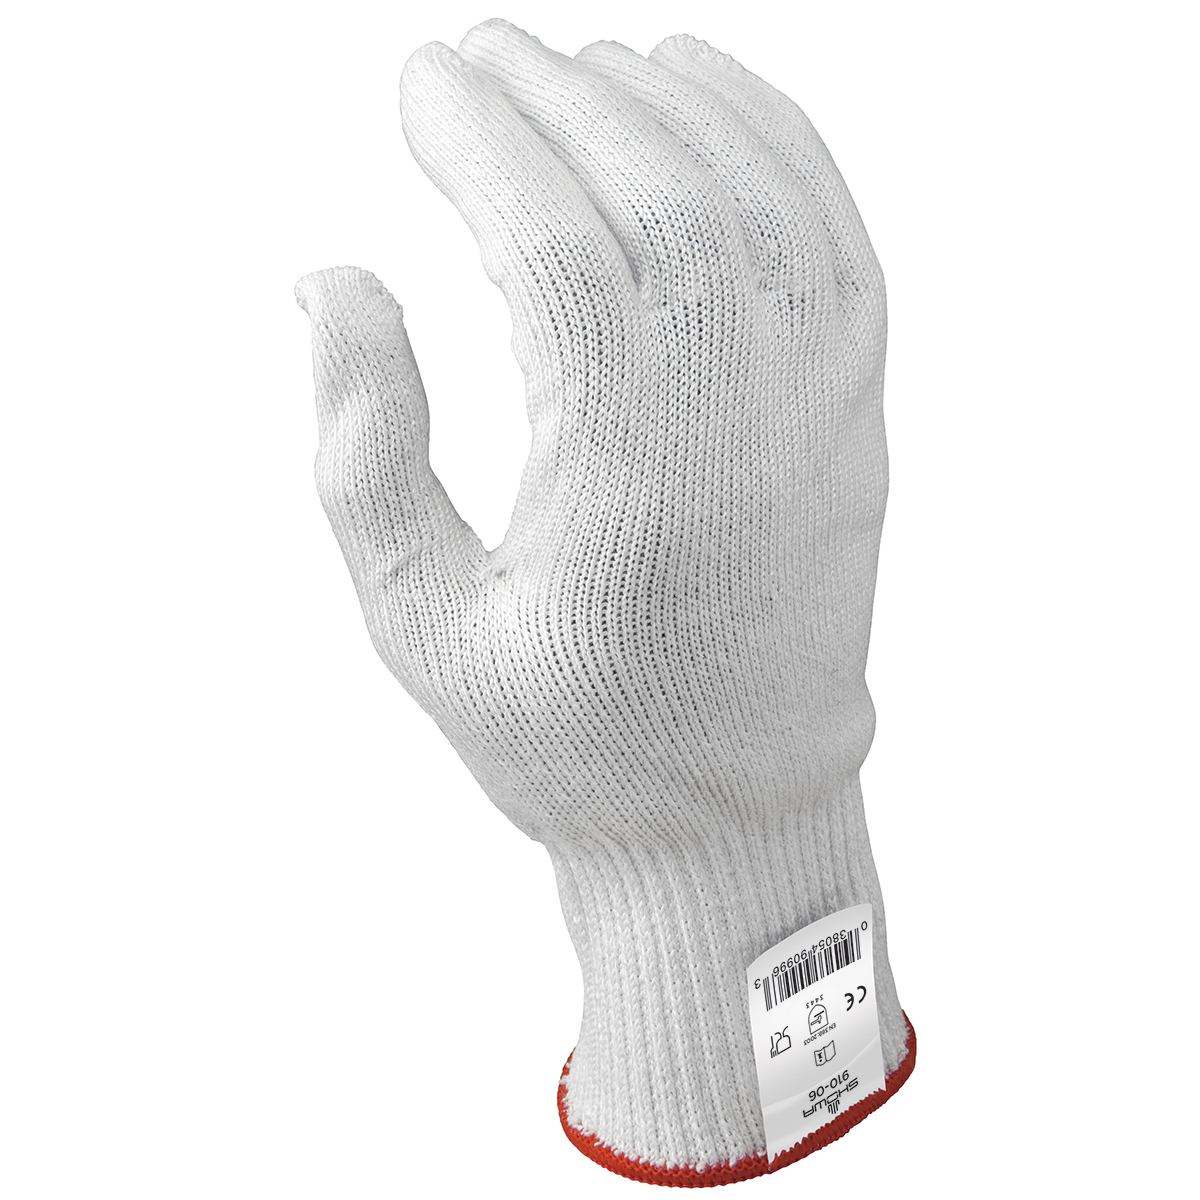 Rubber Coated Work Gloves